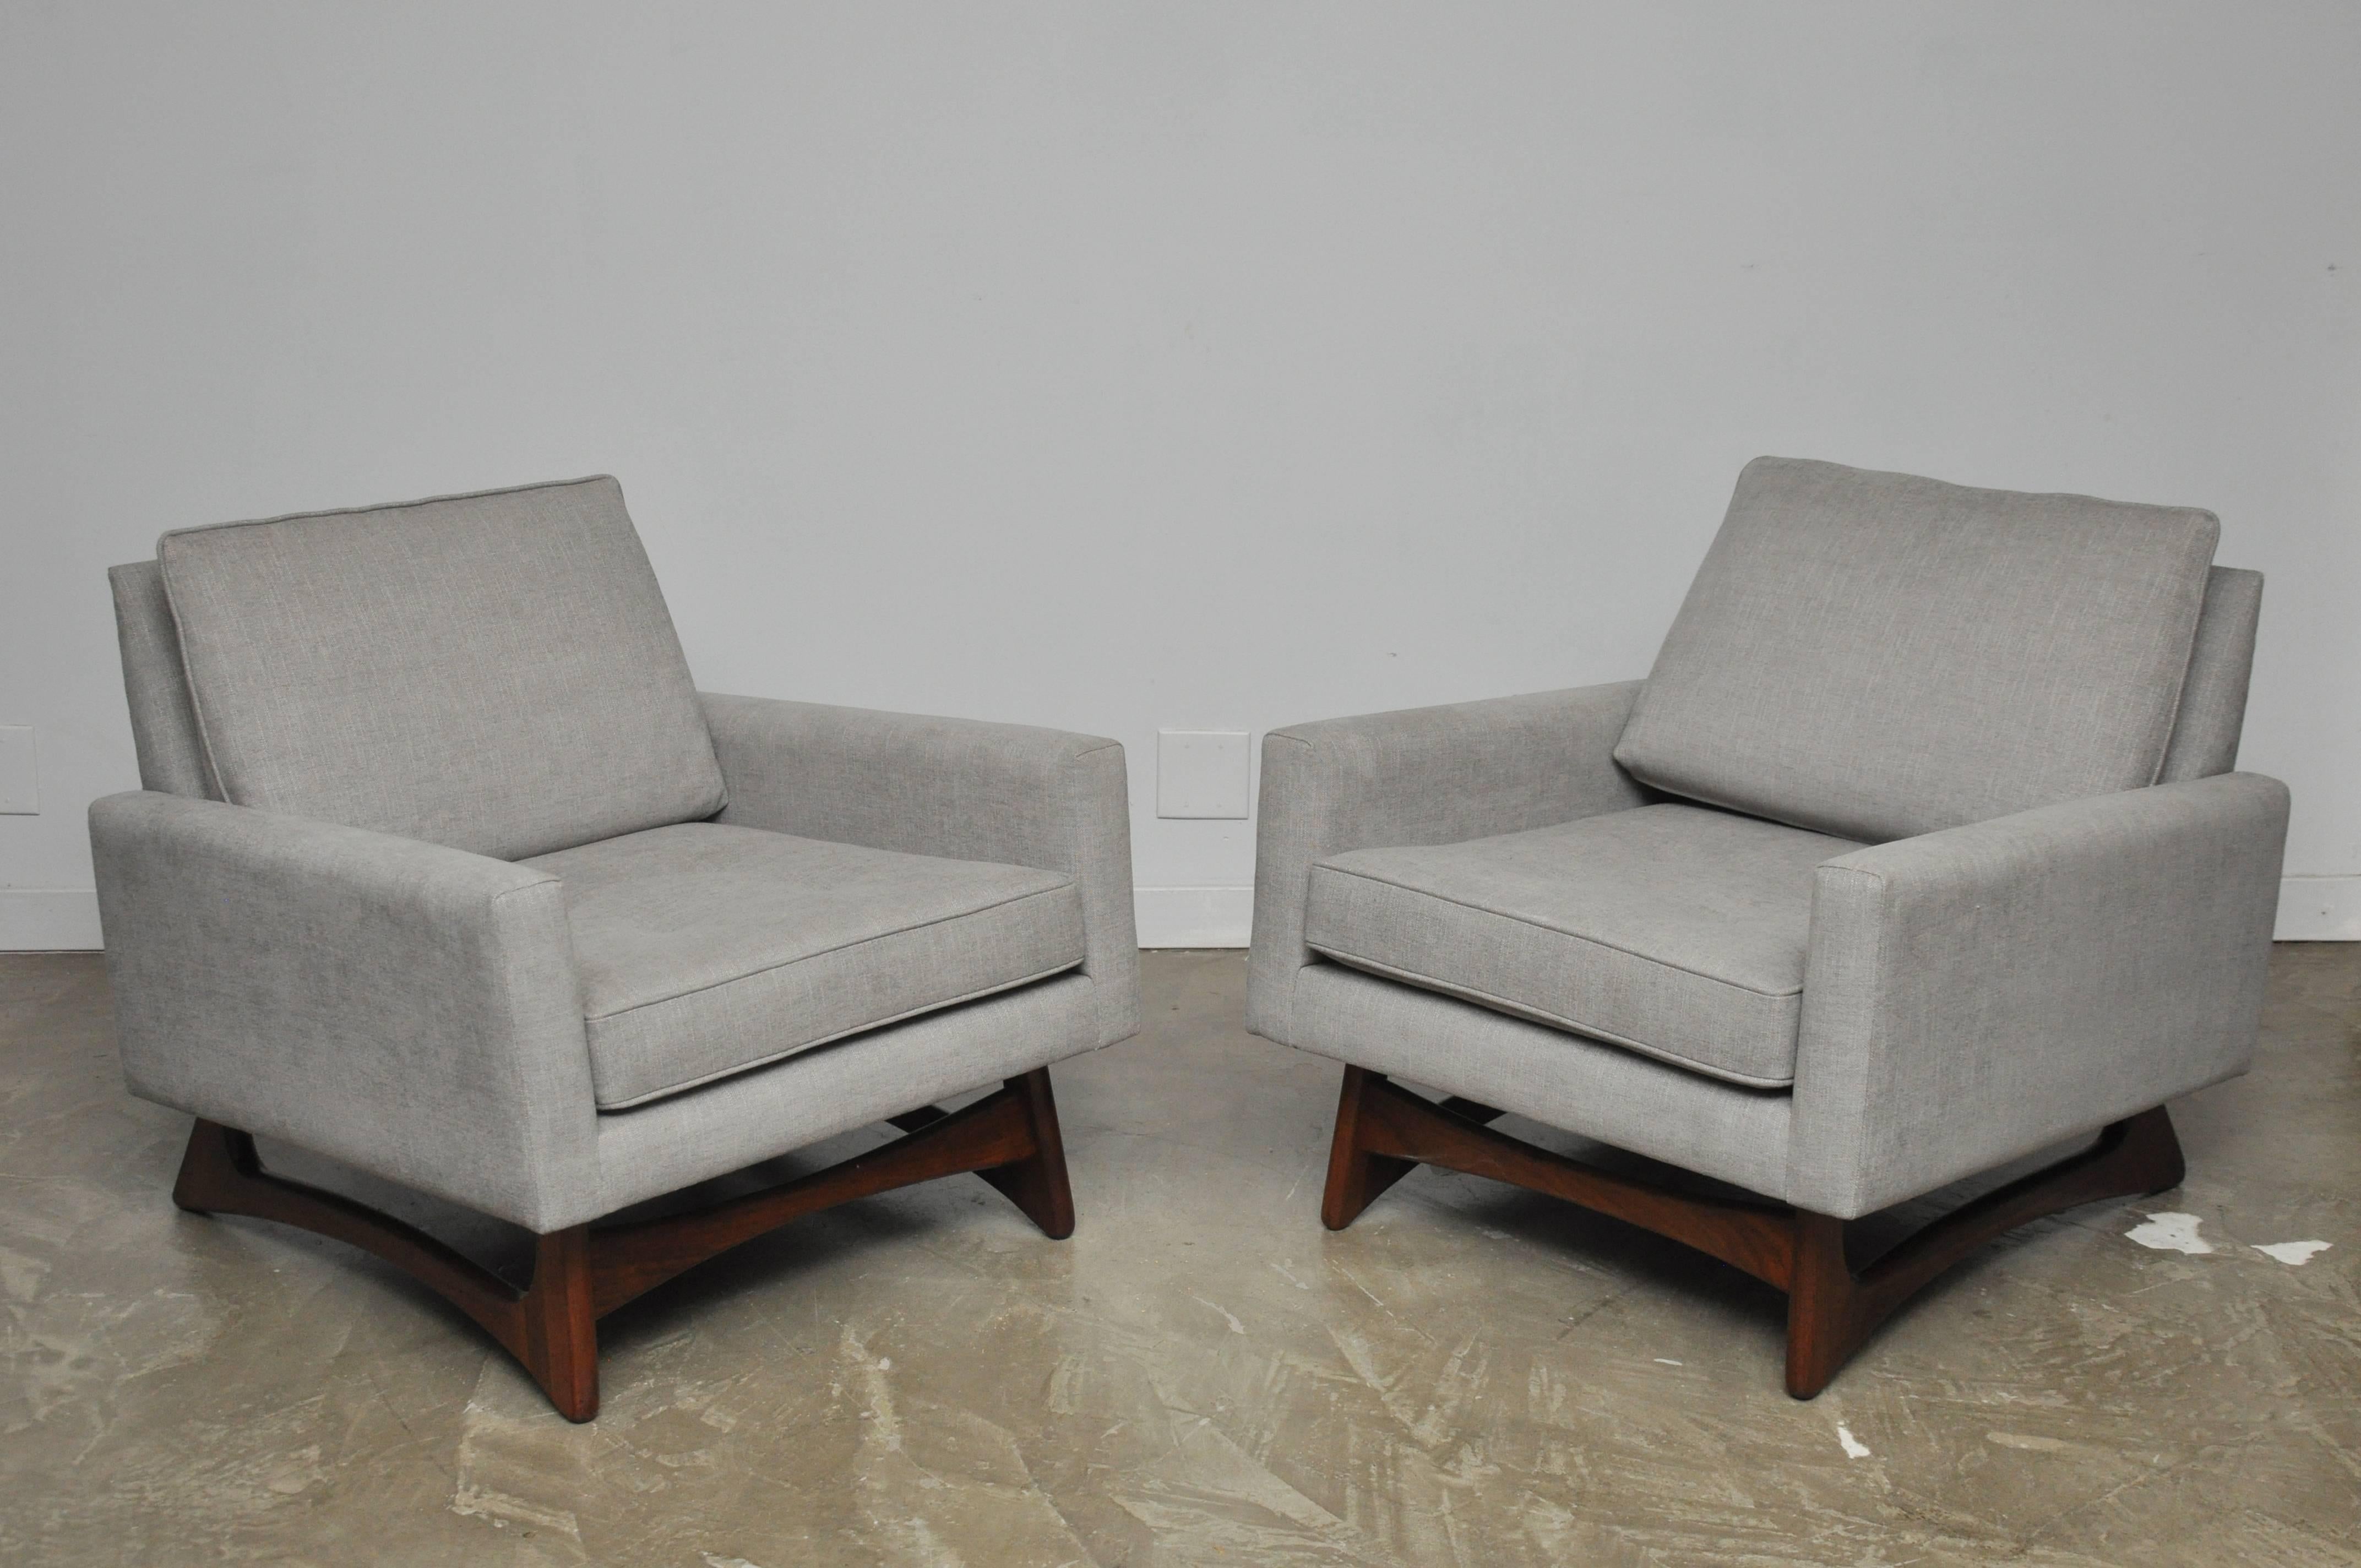 This fully restored pair of Gondola club chairs by Adrian Pearsall. Refinished sculptural walnut bases with new upholstery.